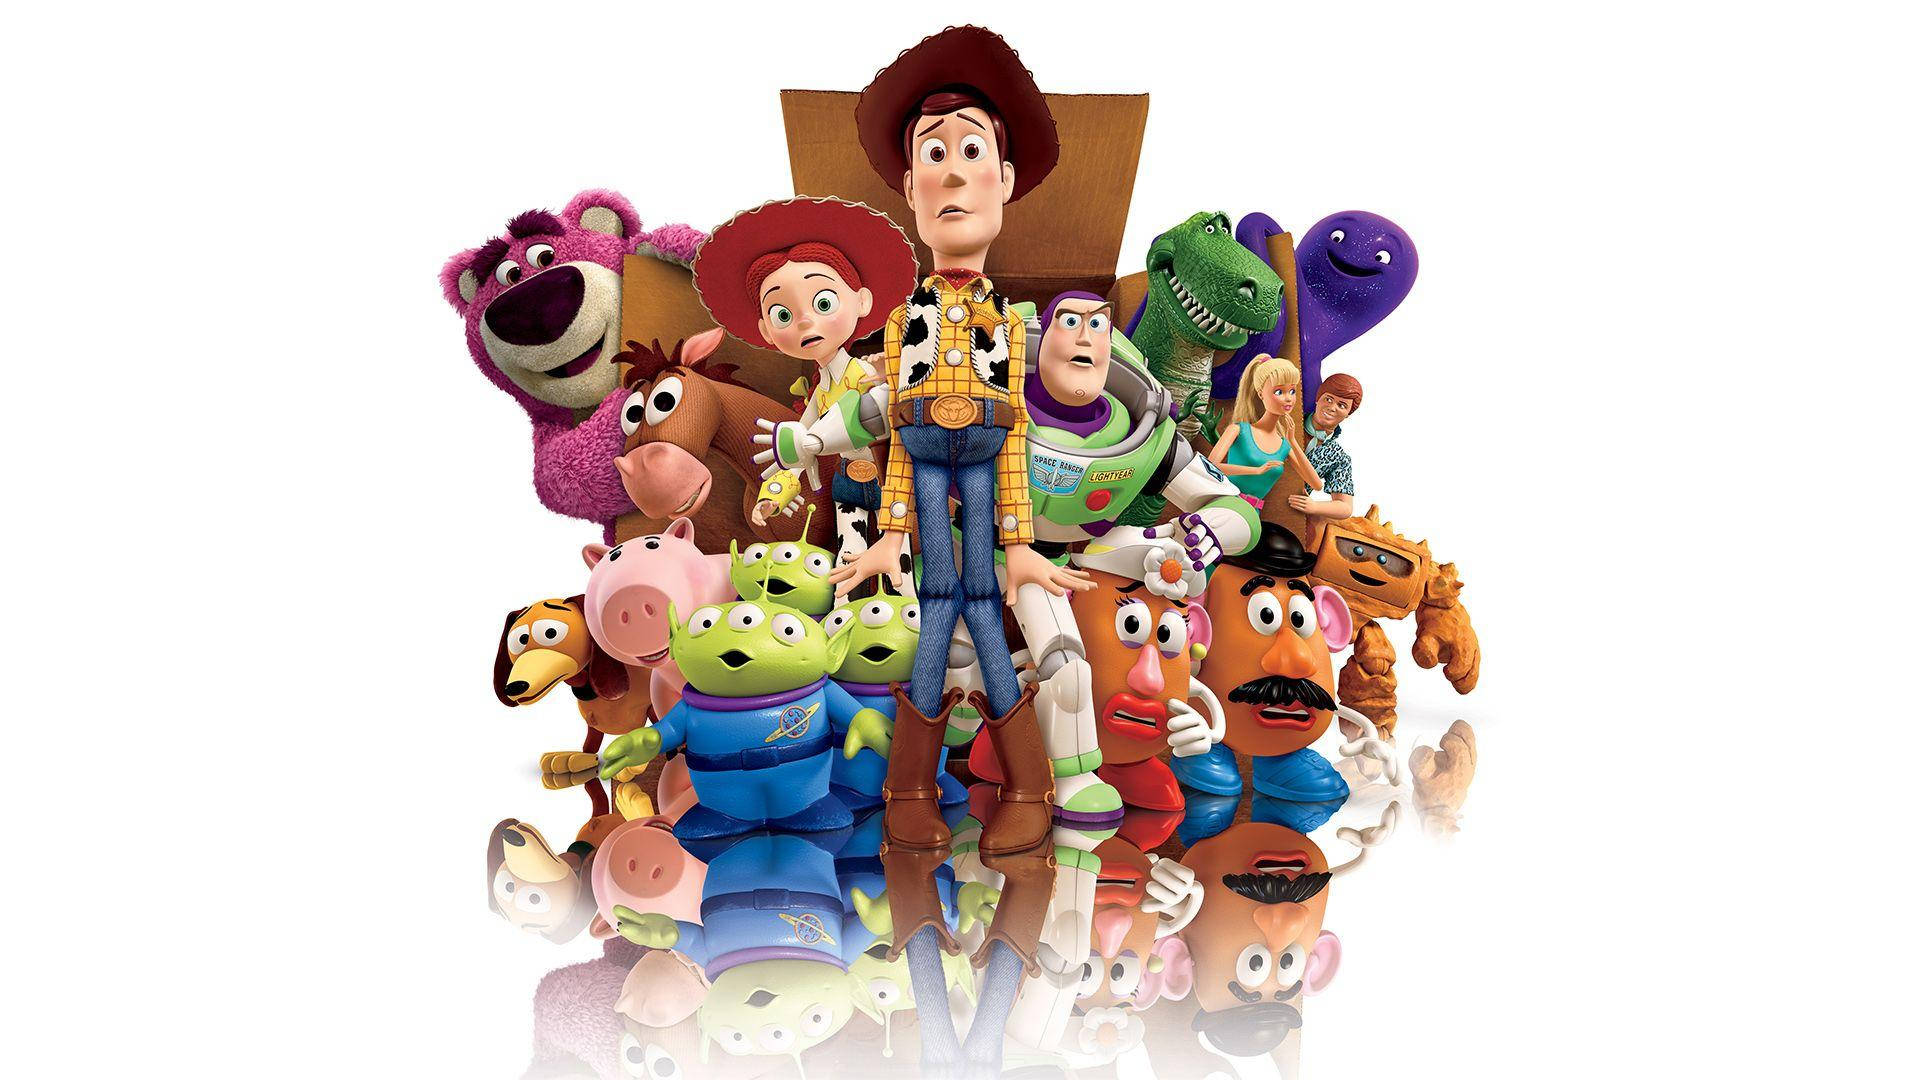 Toy Story 3 Shocked Expression Wallpaper